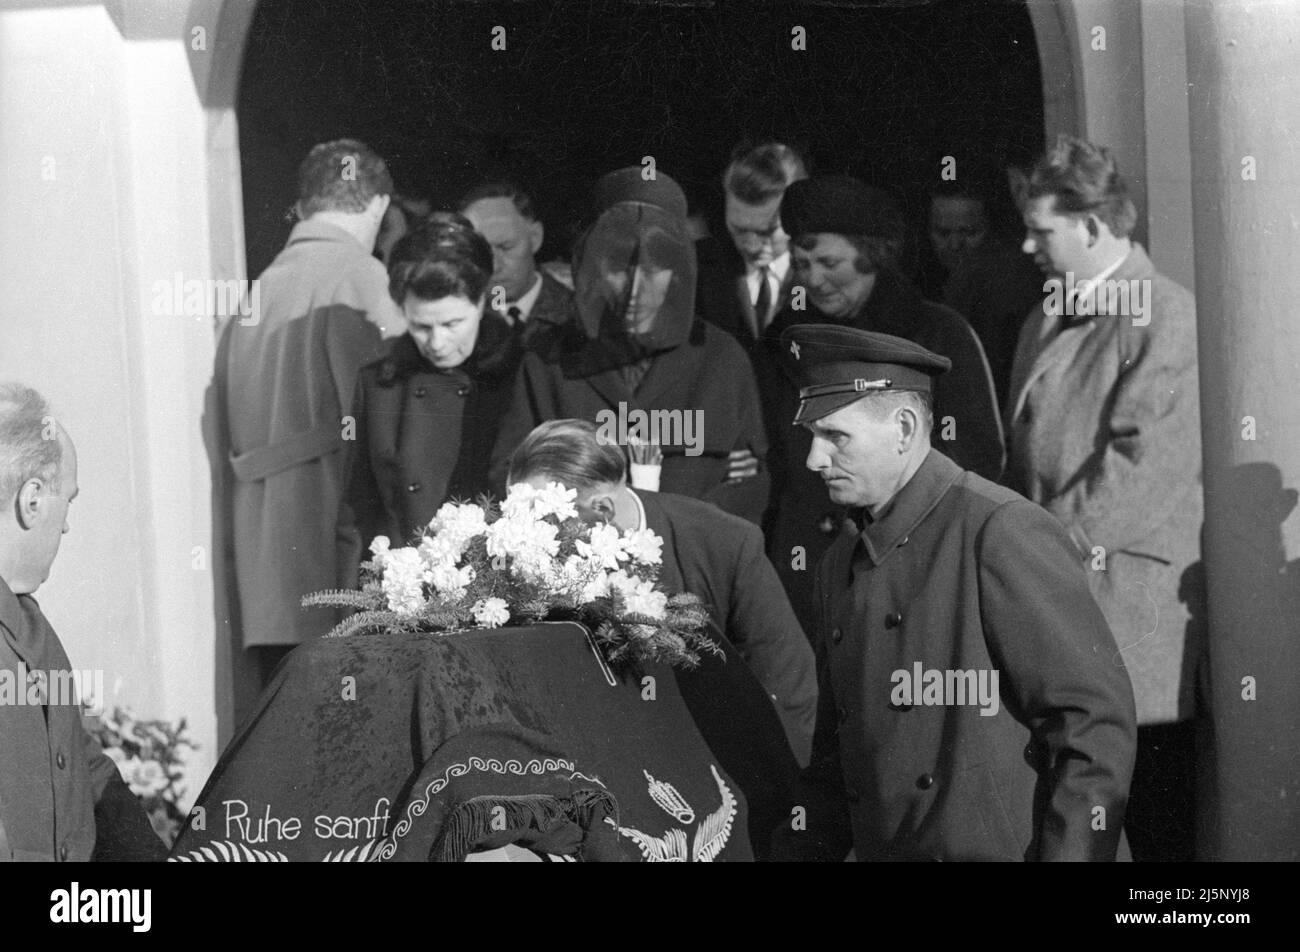 Albert Blutmoser from Erding was mistakenly killed by a shipment of poisoned gentian schnapps. Willi Leinauer from Kempten was suspected of having sent the package of schnapps to his husband together with his girlfriend Christa Müller. Funeral of the victim Albert Blutmoser. [automated translation] Stock Photo